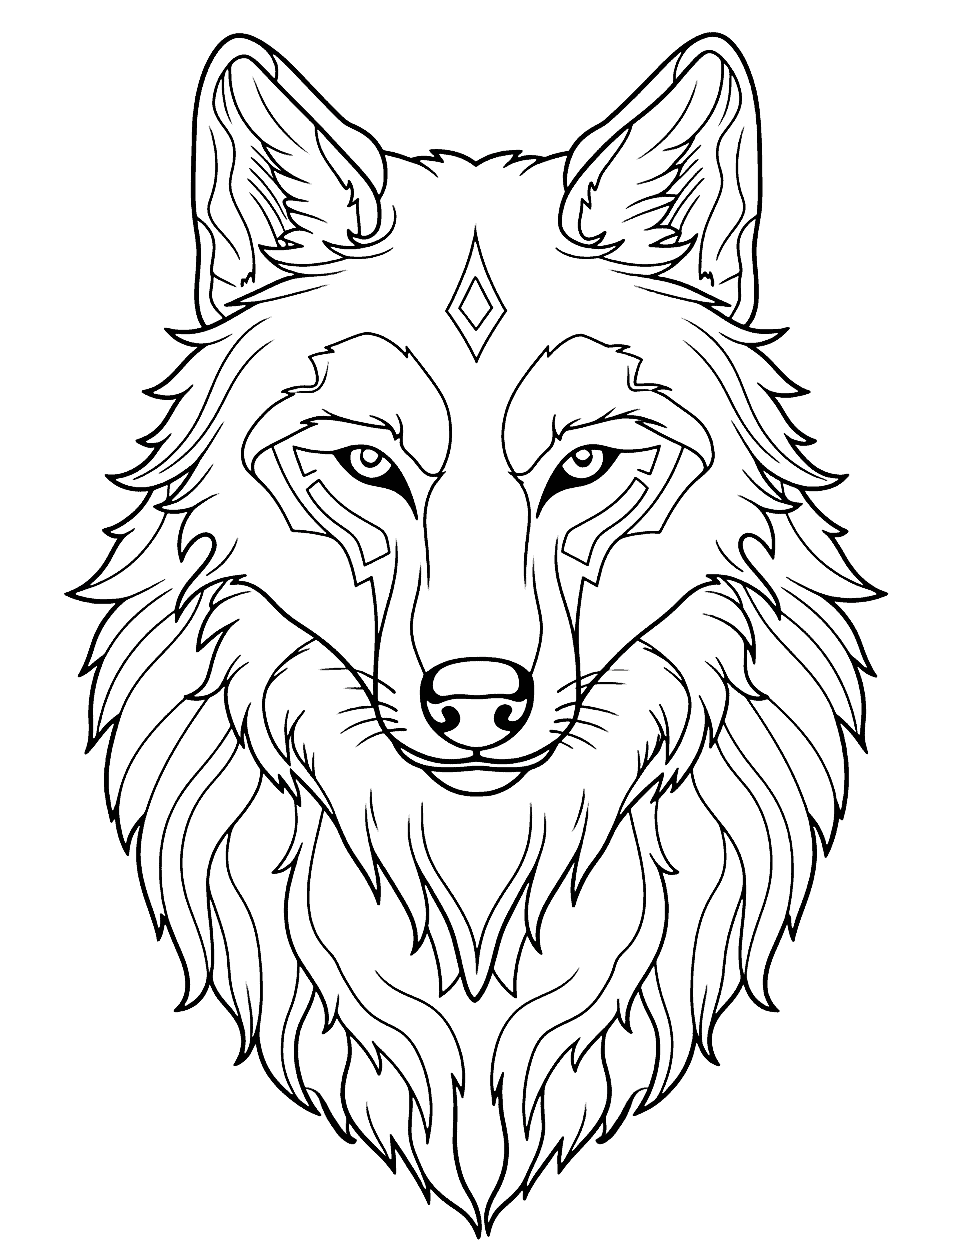 Majestic Wolf Head Coloring Page - Close-up of a wolf’s head, highlighting its piercing eyes and sharp features.